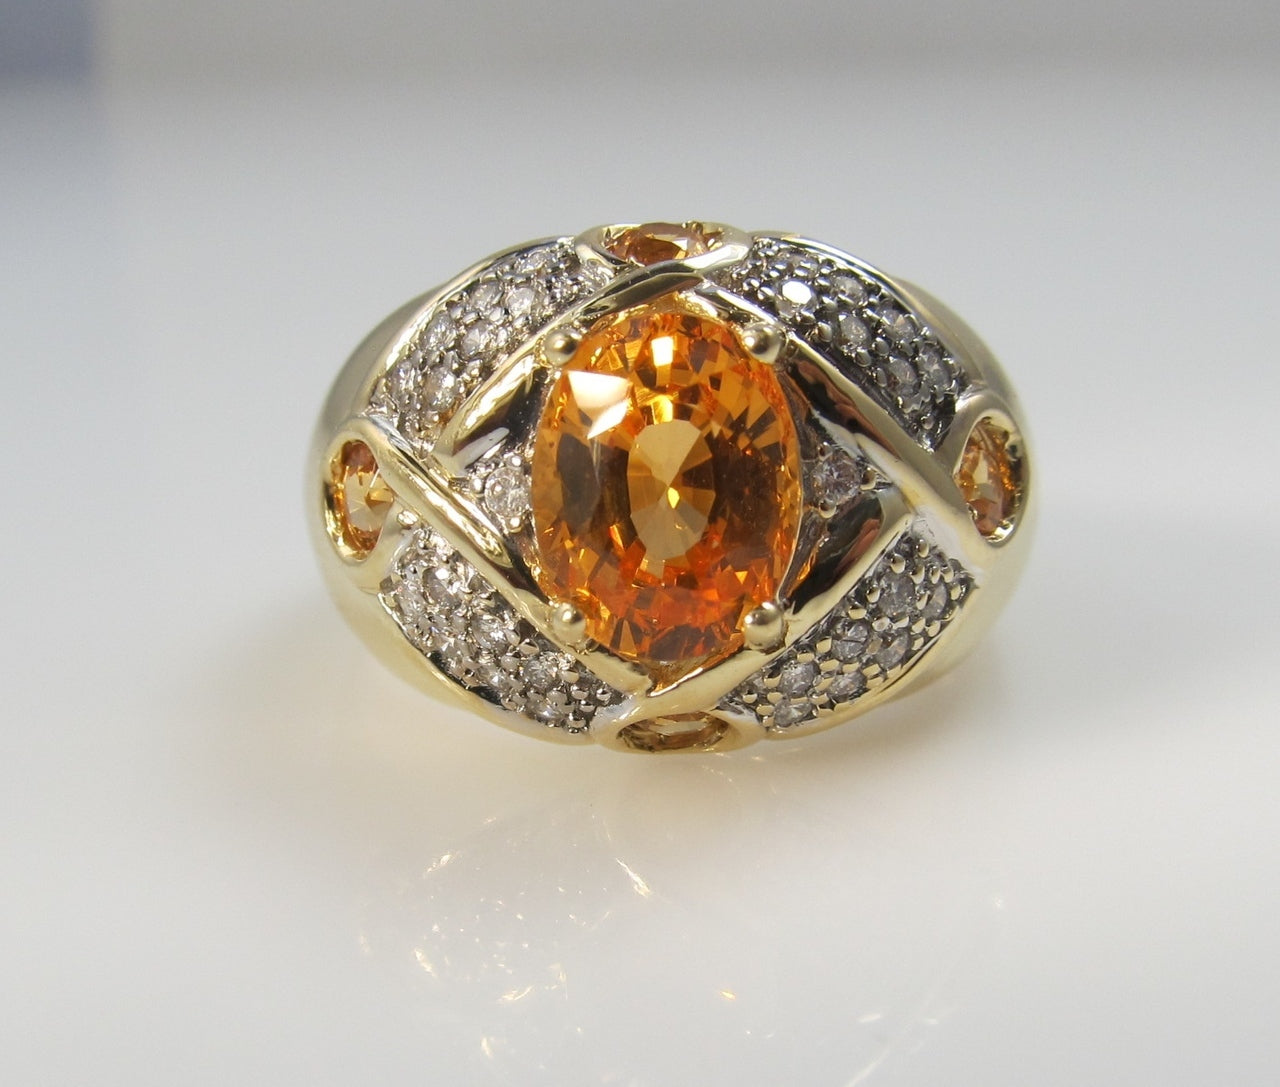 Modern estate 14k gold ring with a 2.50ct center orange sapphire and diamonds